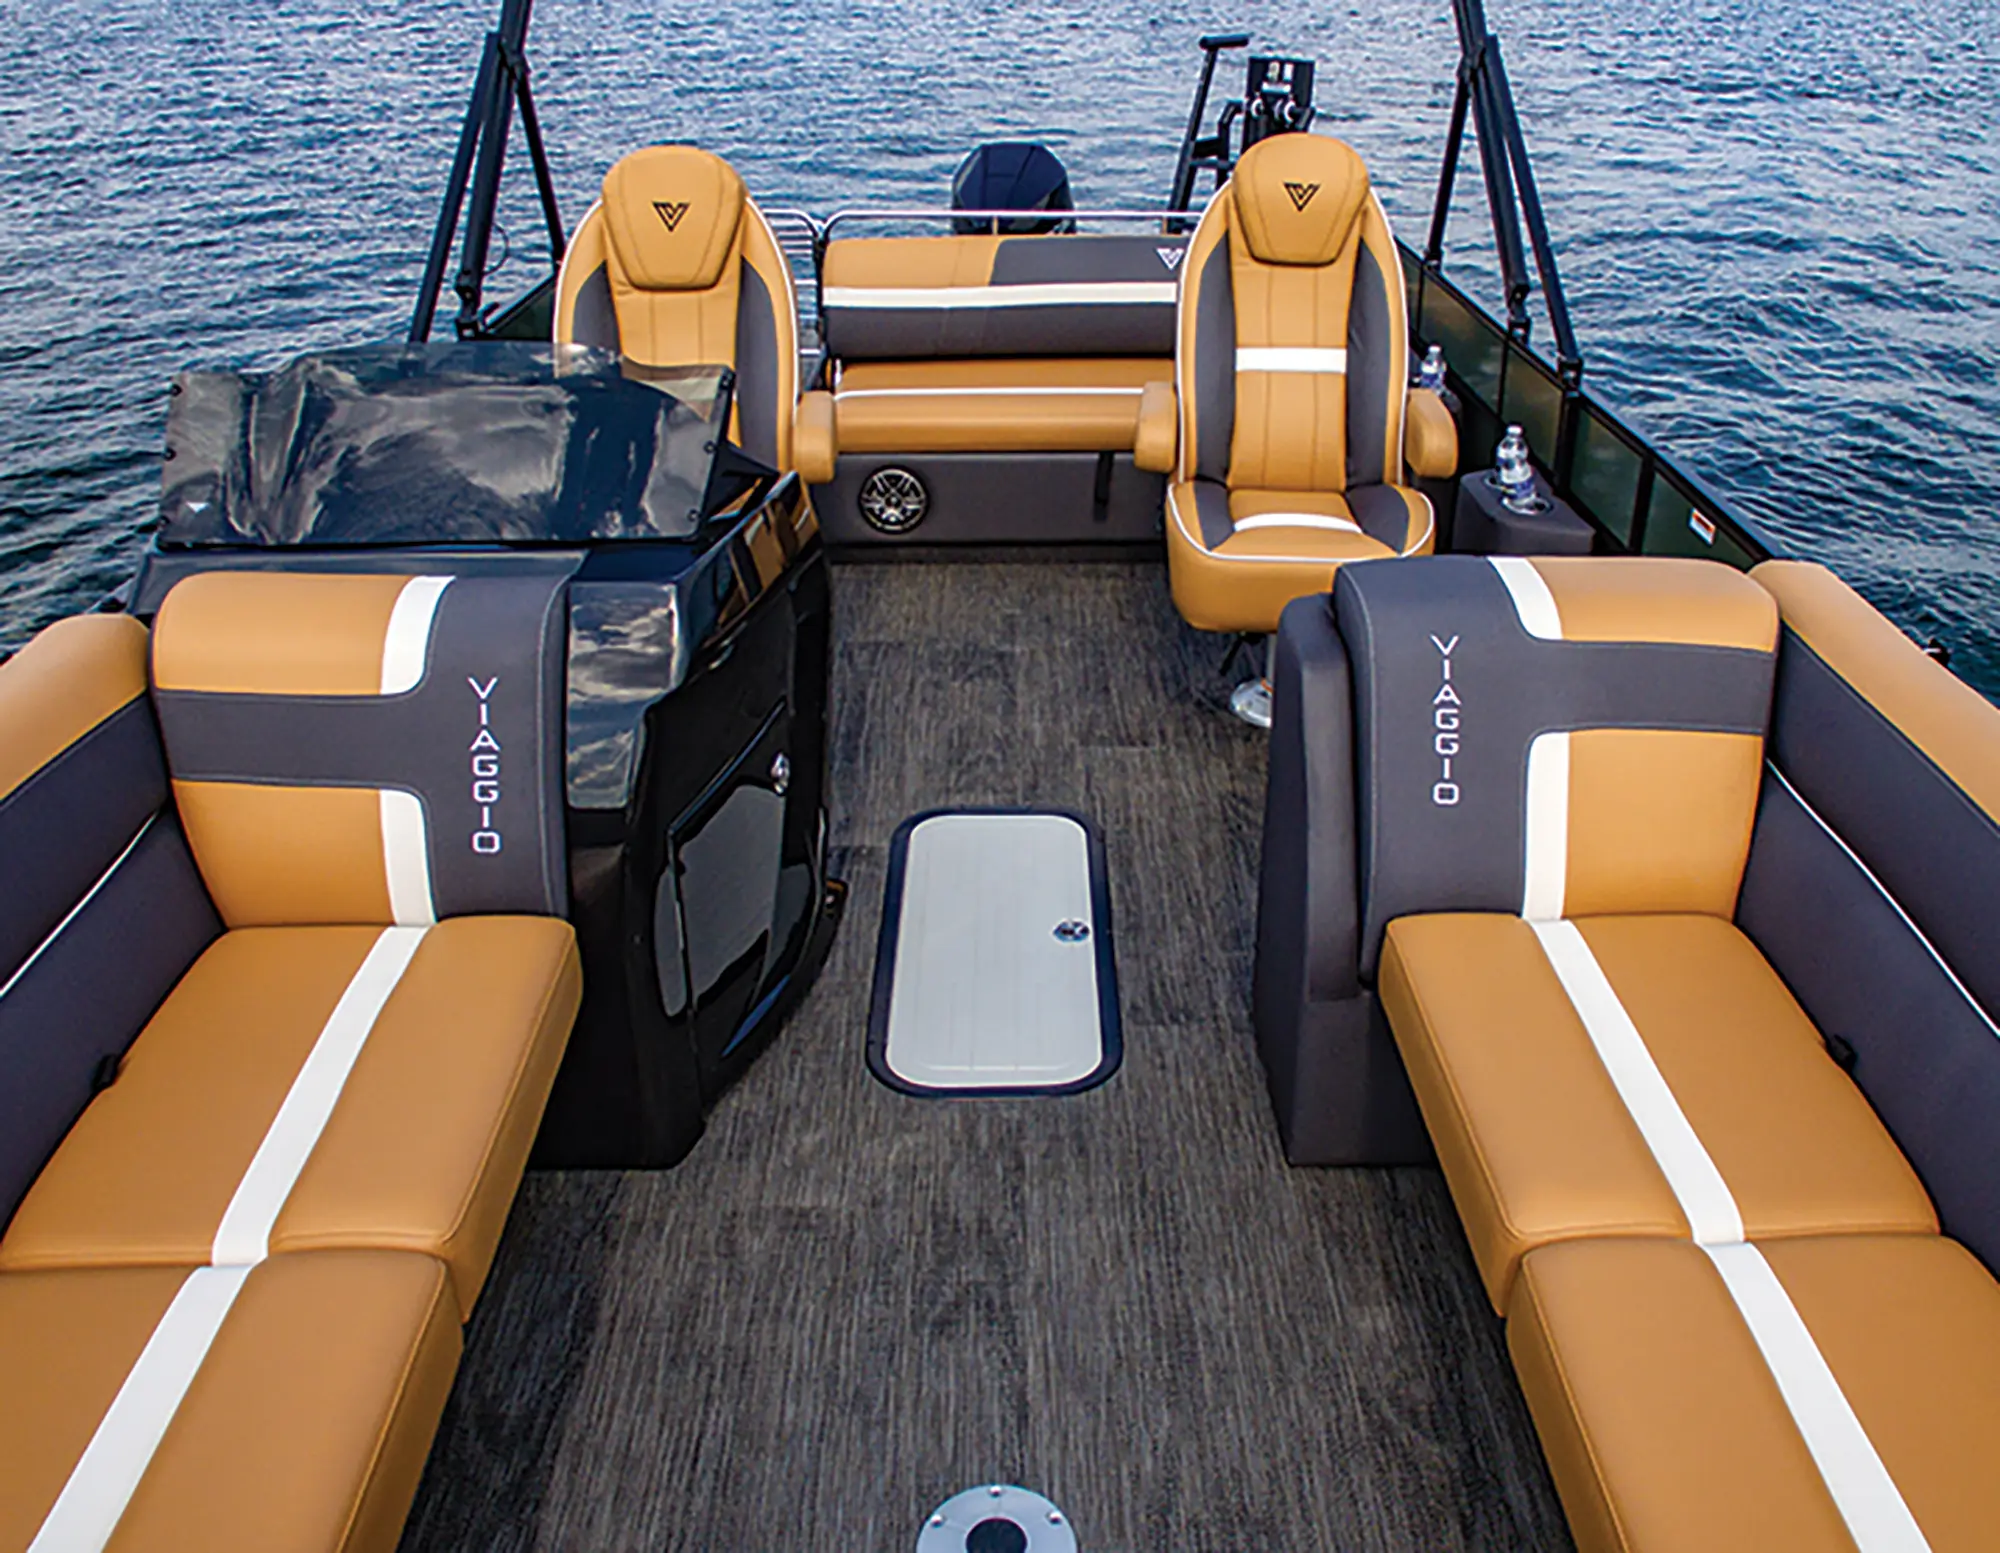 Landscape close-up top photograph view of the Viaggio Lago X24S pontoon motorboat vehicle's passenger lounge couches area, driver's seat area, and an another individual lounge chair seat next to driver's seat